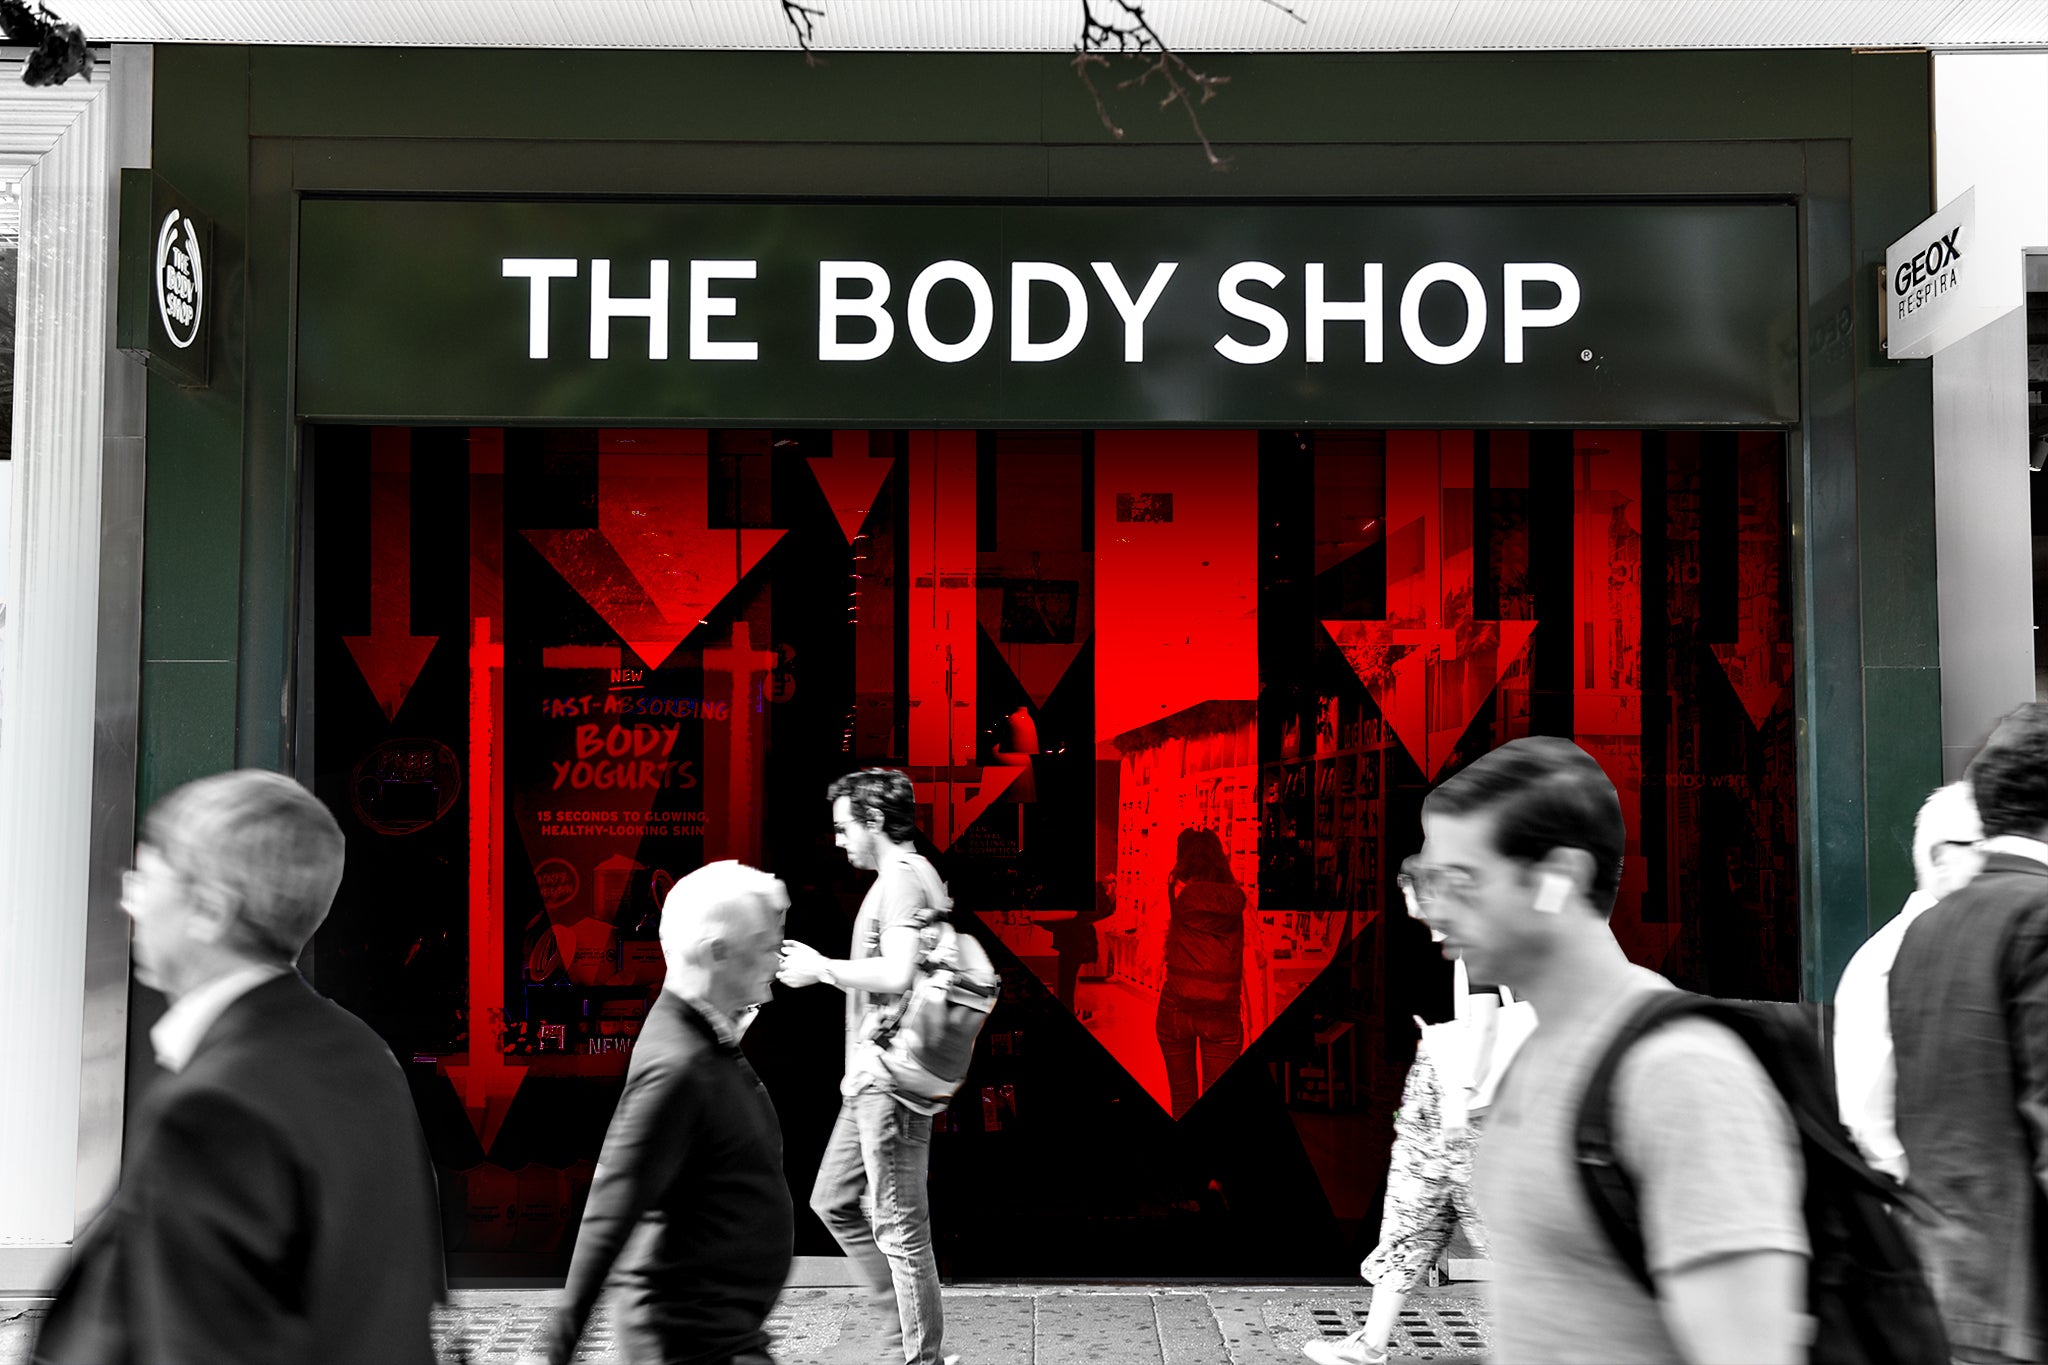 The Body Shop has sacked hundreds of workers without giving them notice